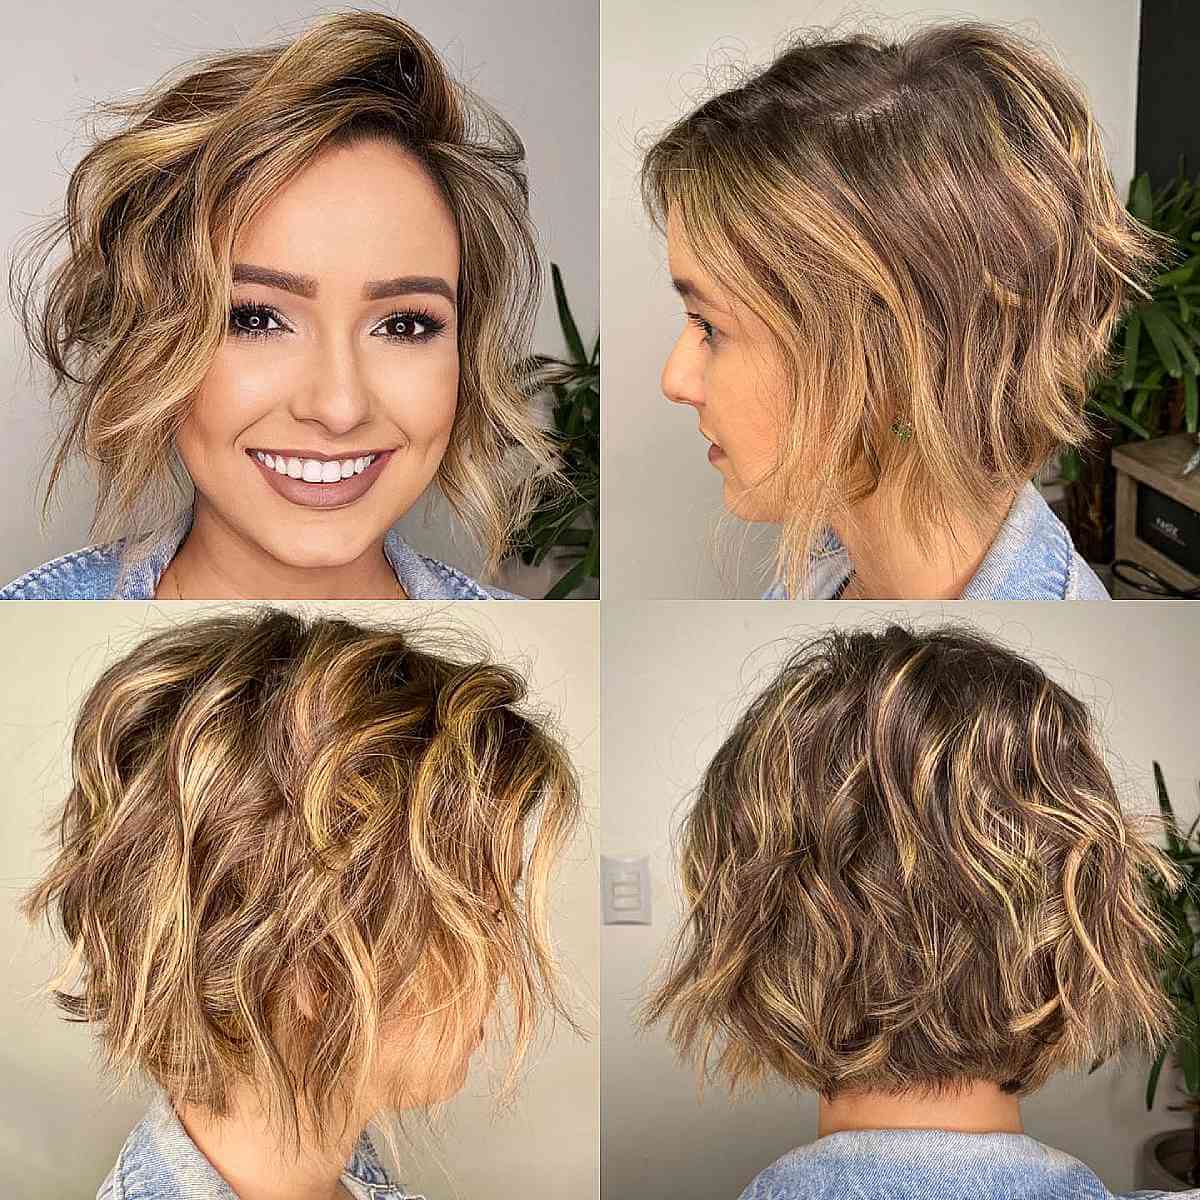 Deeply Side-Parted Messy Short Bob